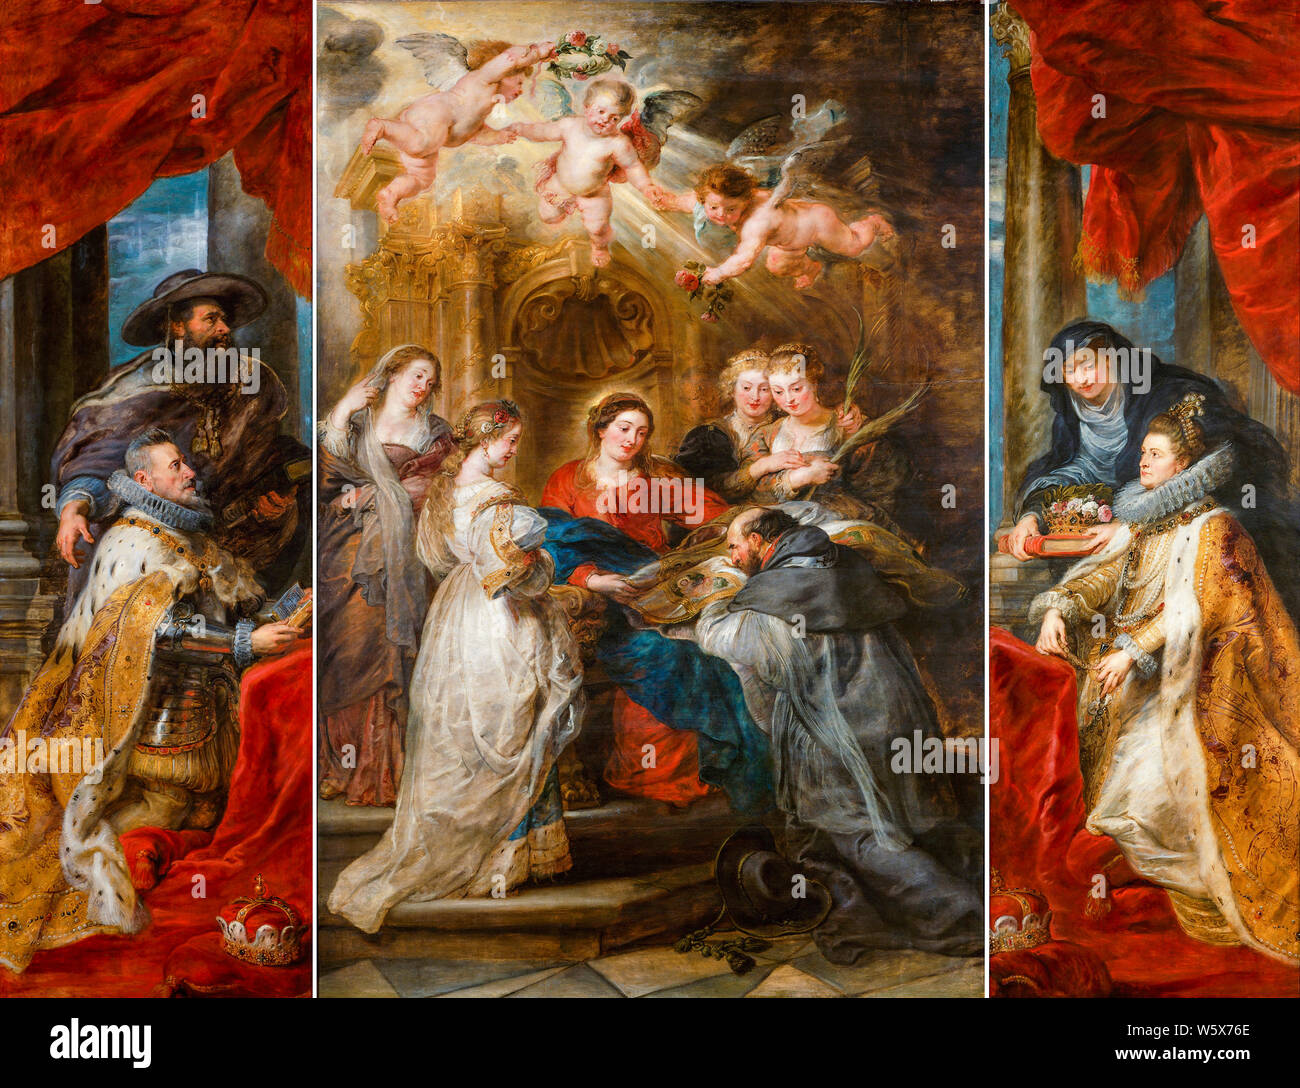 Peter Paul Rubens, The Triptych of St. Ildefonso, painting, 1630-1632 Stock Photo